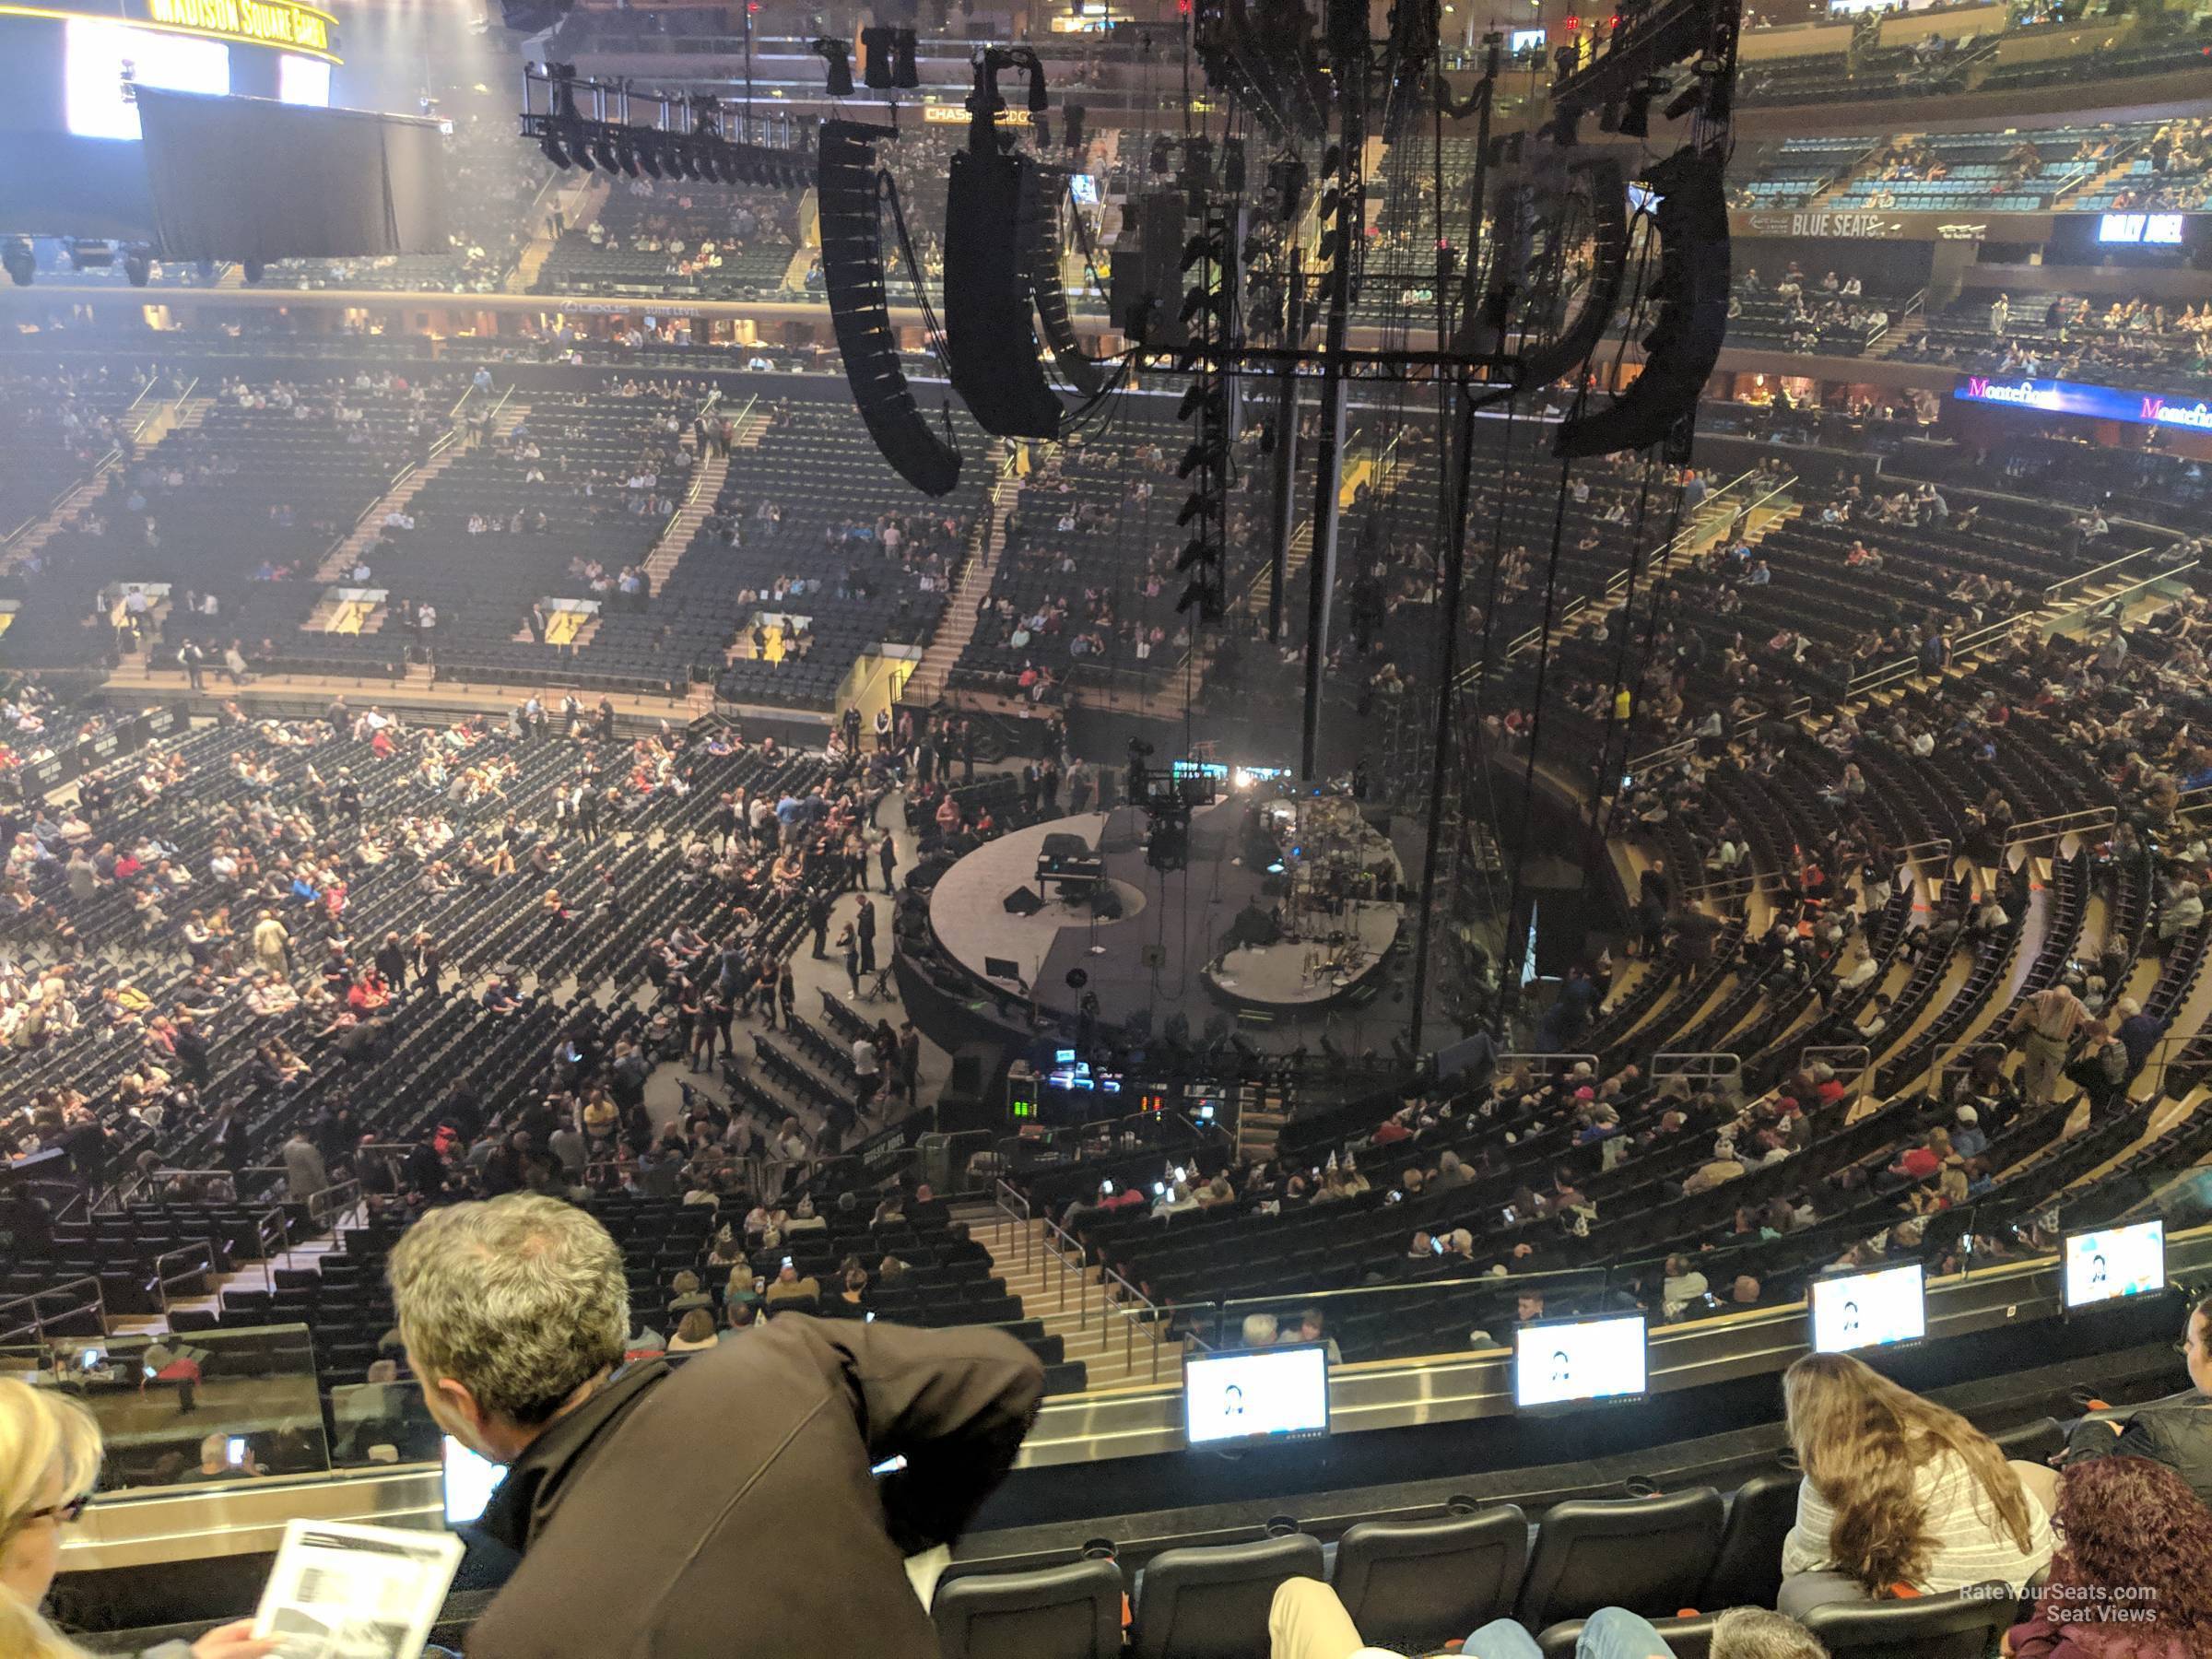 Section 214 at Madison Square Garden for Concerts